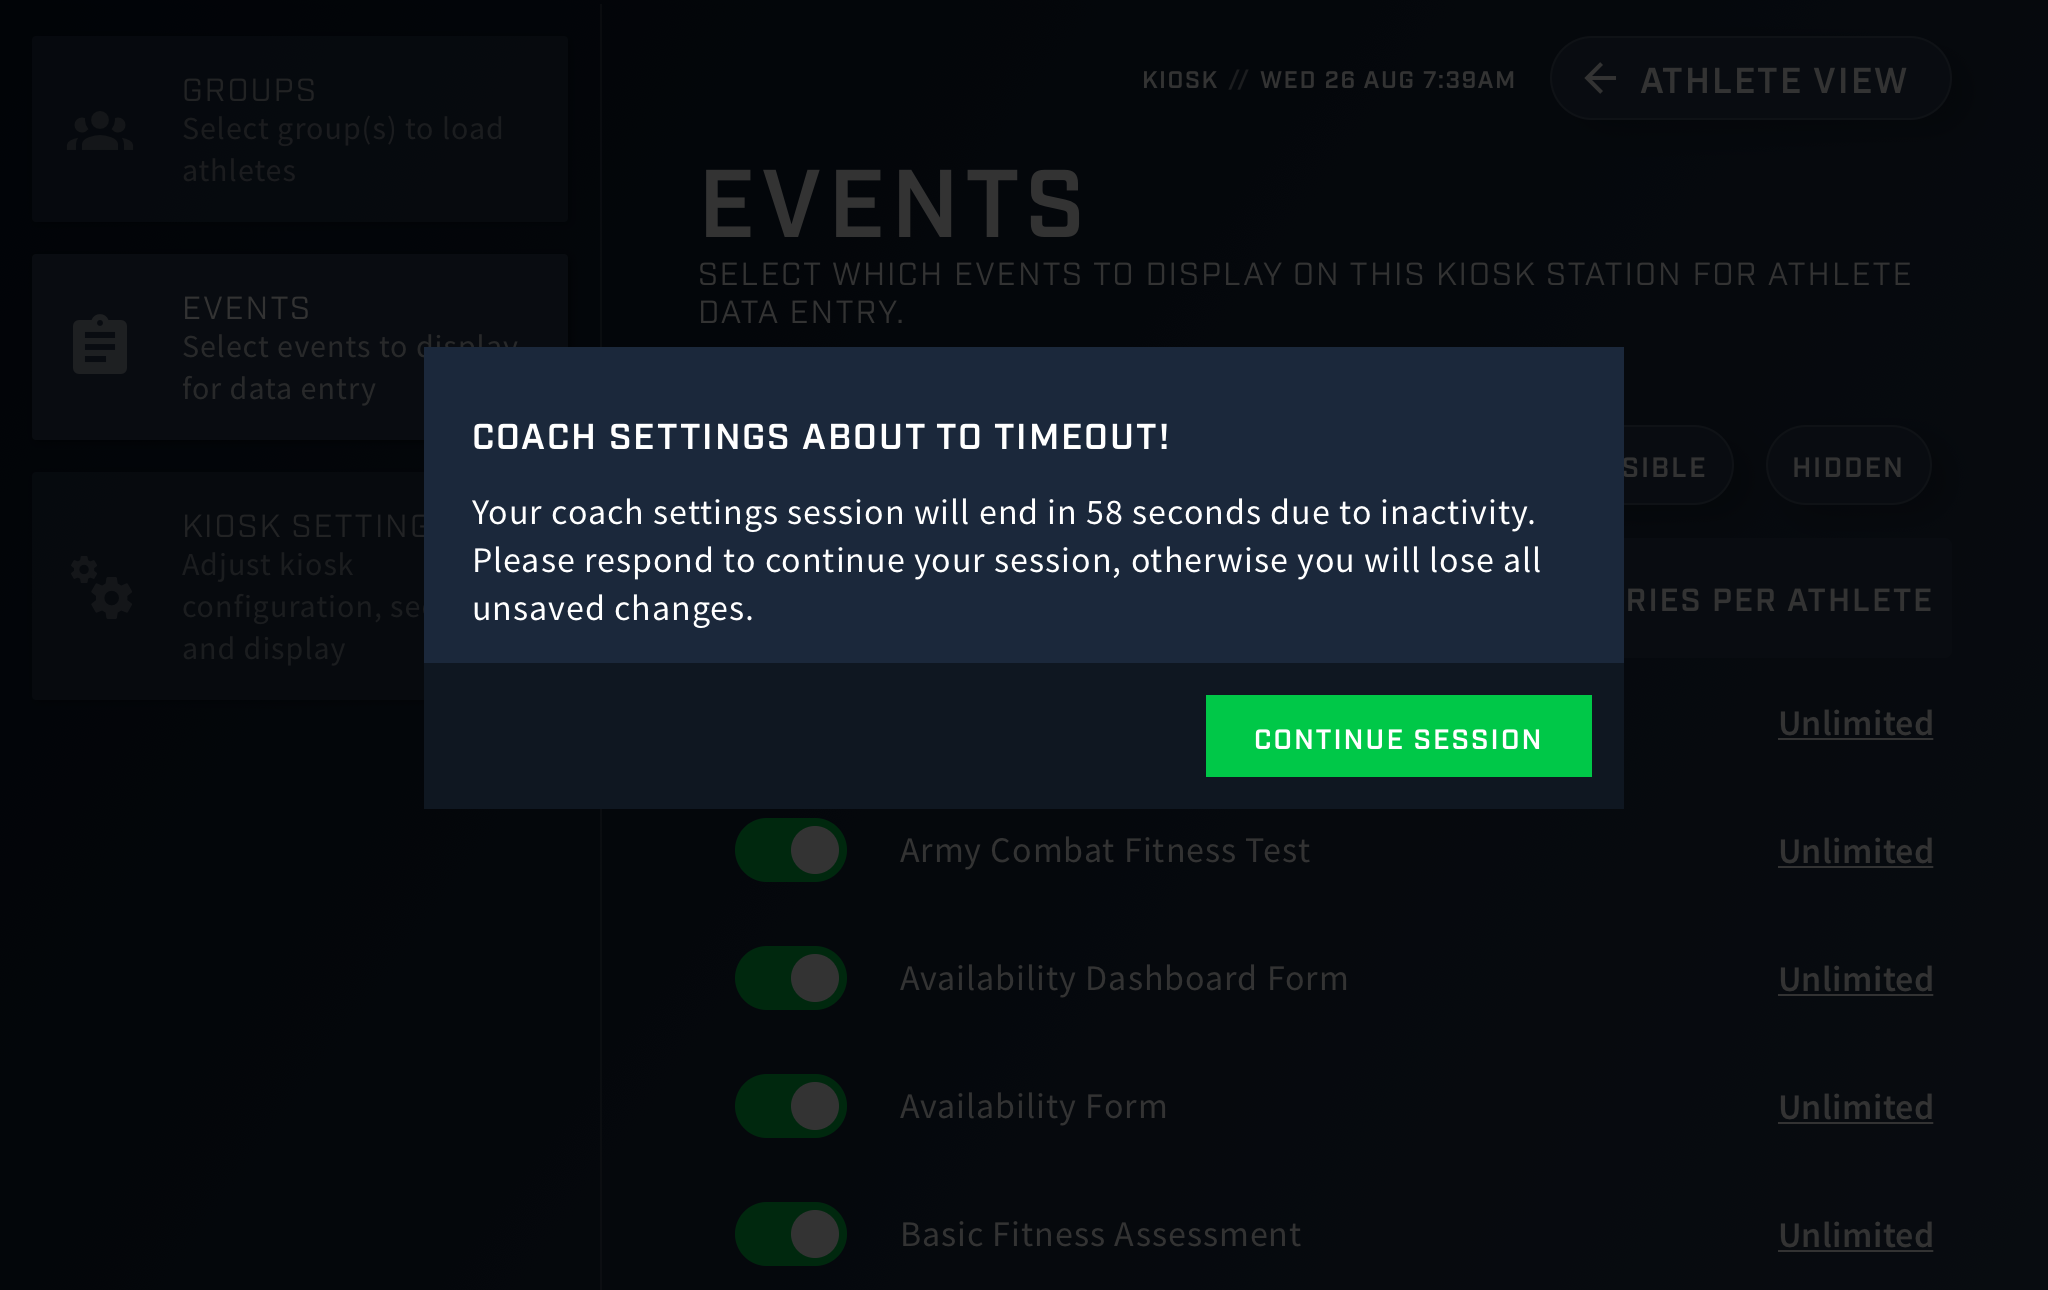 A screenshot from the Smartabase Kiosk app showing an example of the time out warning message in the coach settings screen